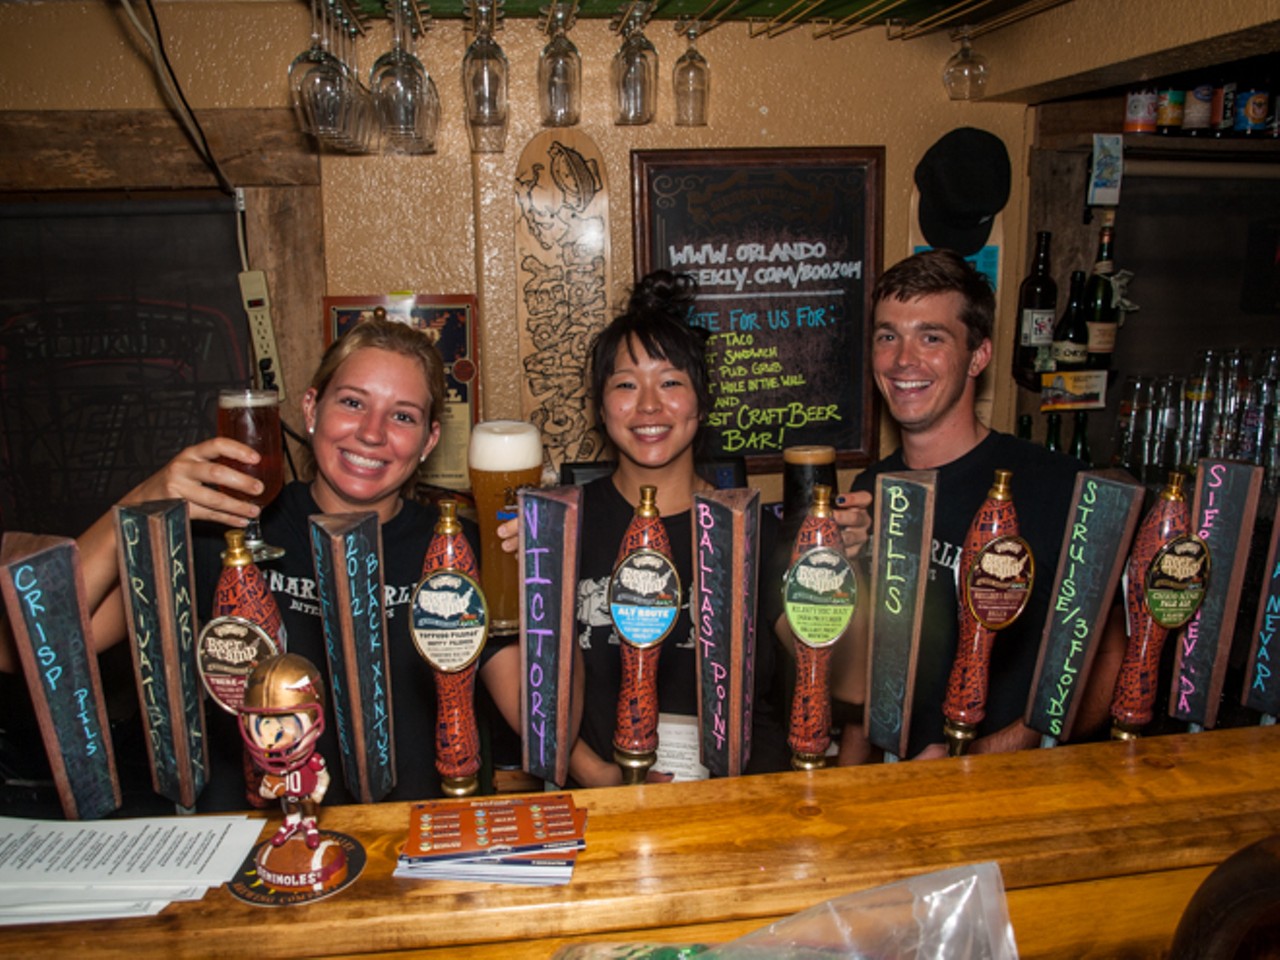  22 hoppy photos from Beer Camp Across America Takeover at Gnarly Barley 